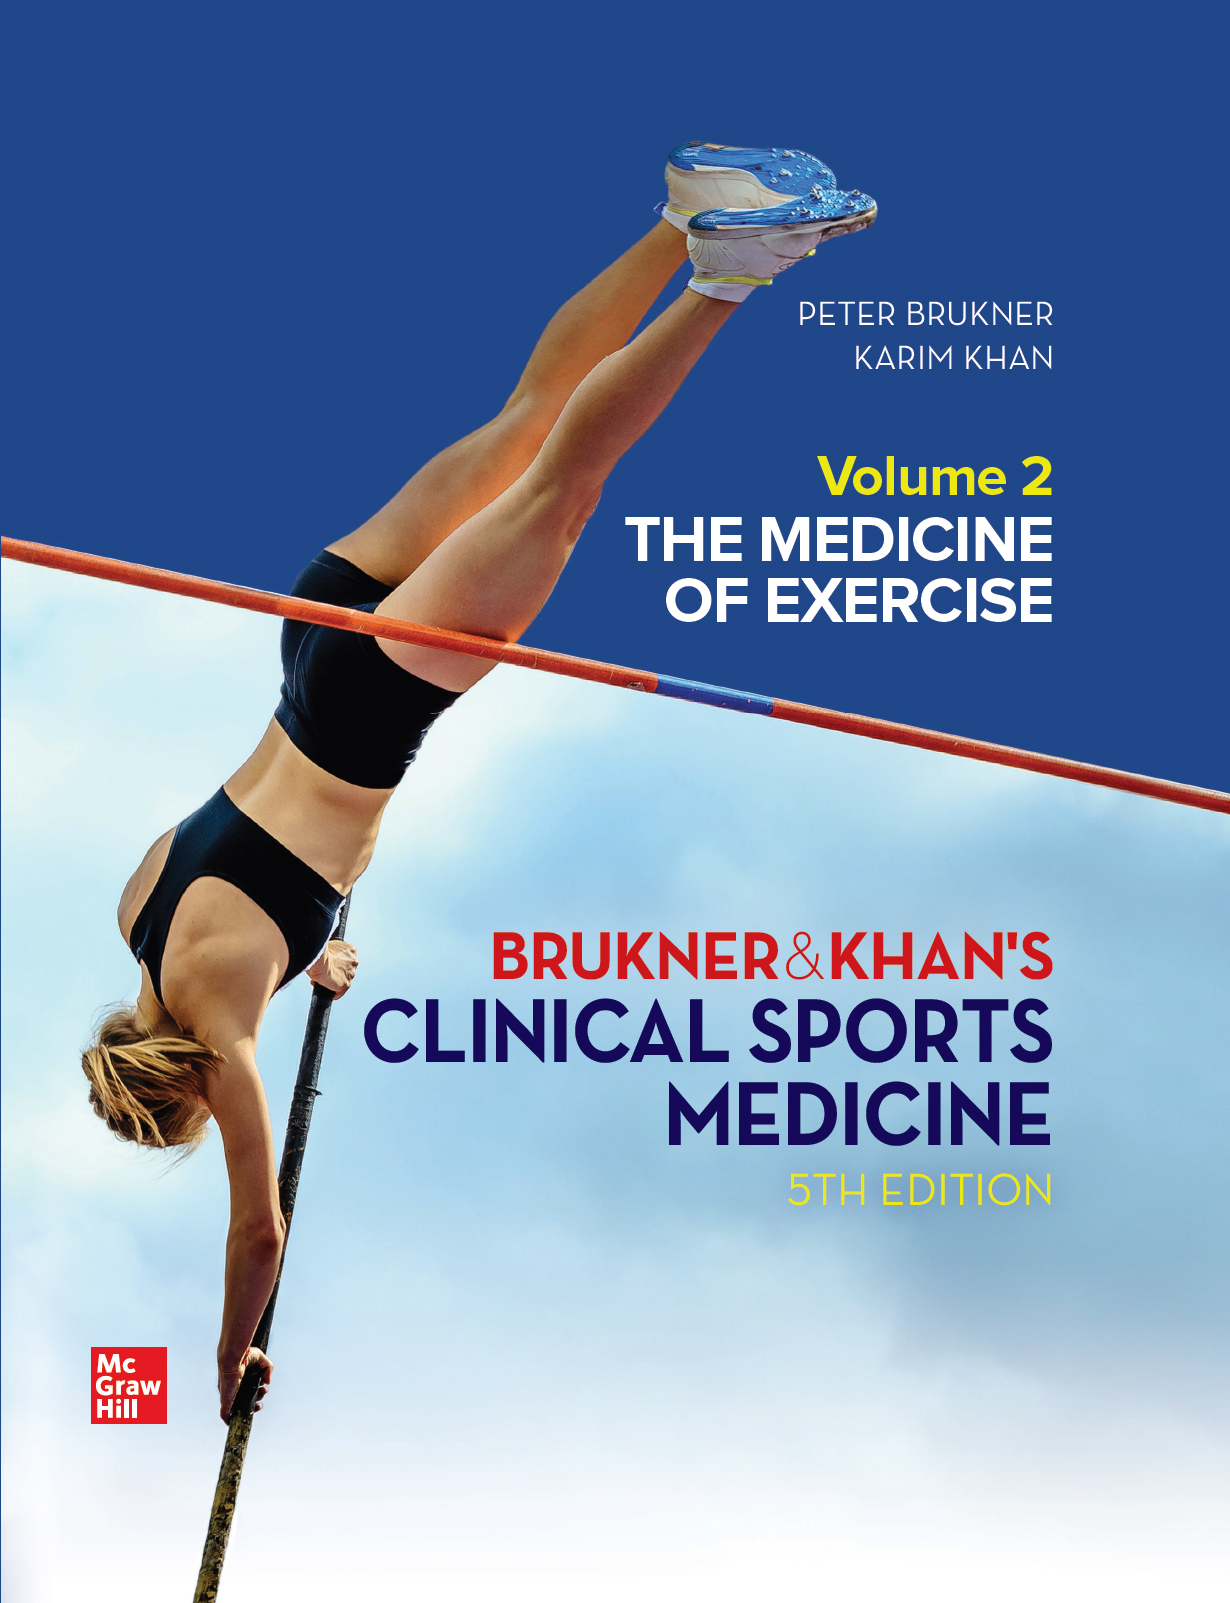 Brukner & Khan's Clinical Sports Medicine, 5th Edition, Volume 2: The Medicine of Exercise (Original PDF from Publisher)